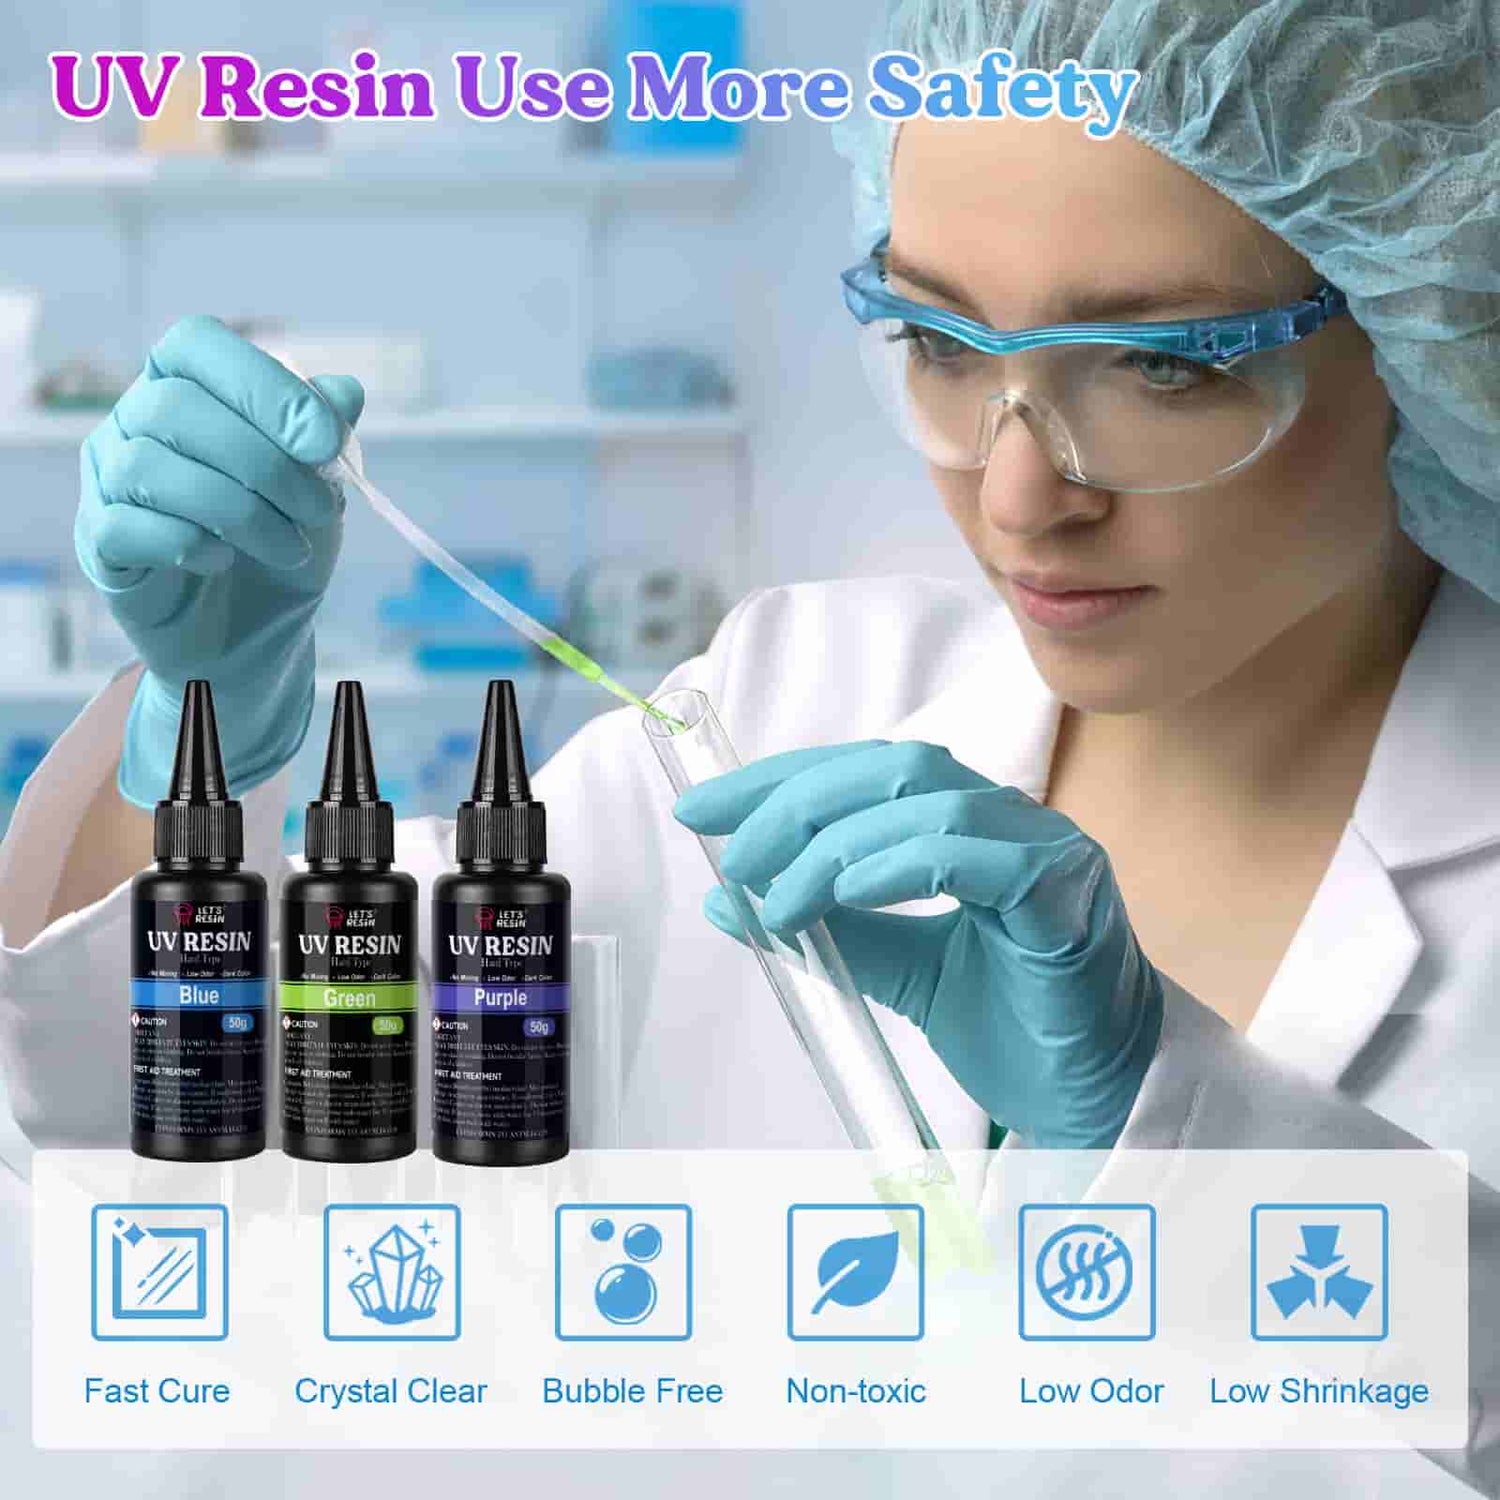 3 Colors UV Resin Kit with Light&Silicone Mat